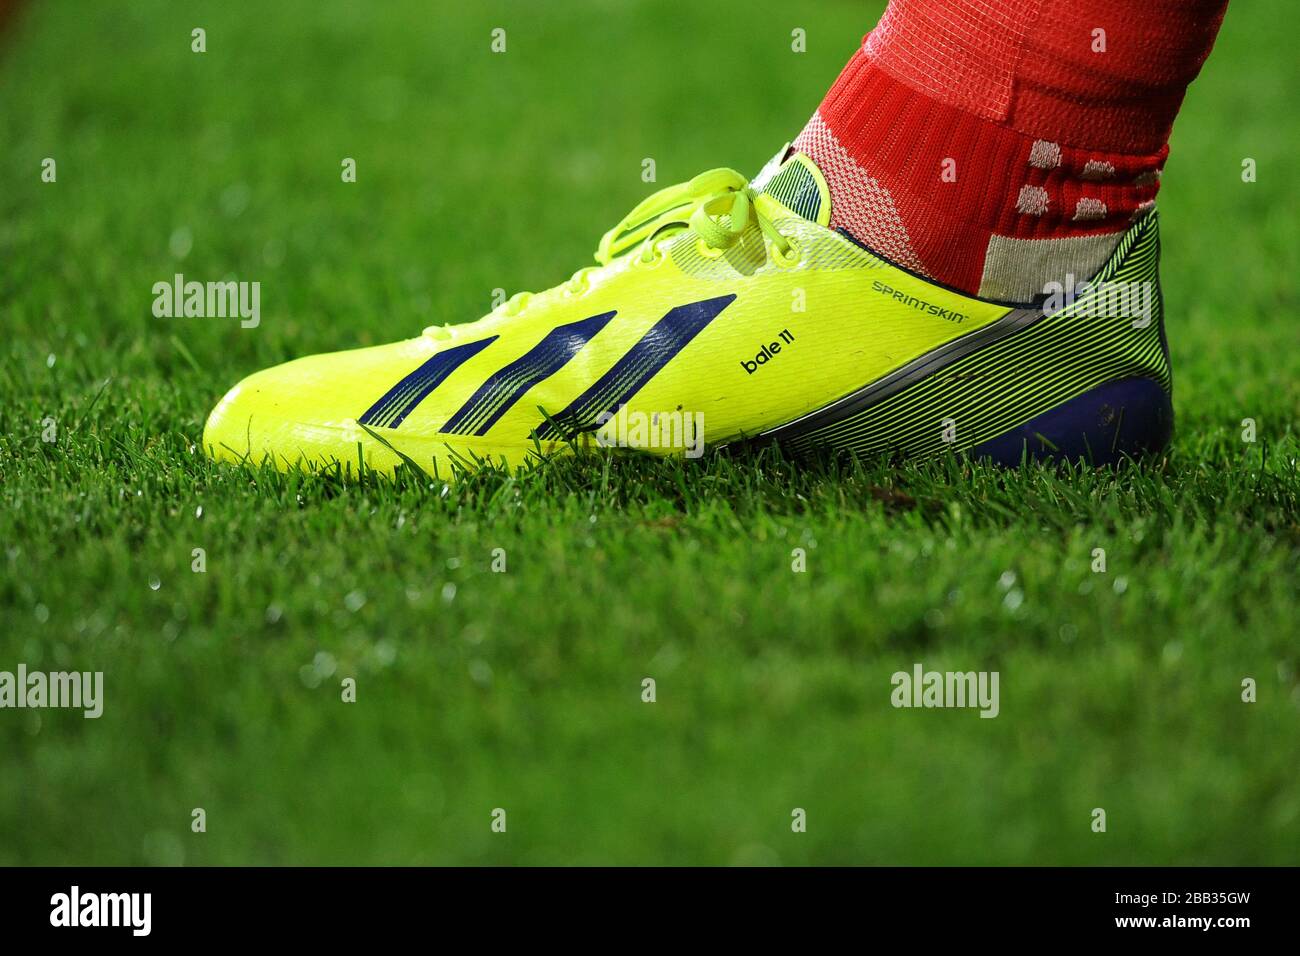 Detail of Gareth Bale's football boots Stock Photo - Alamy